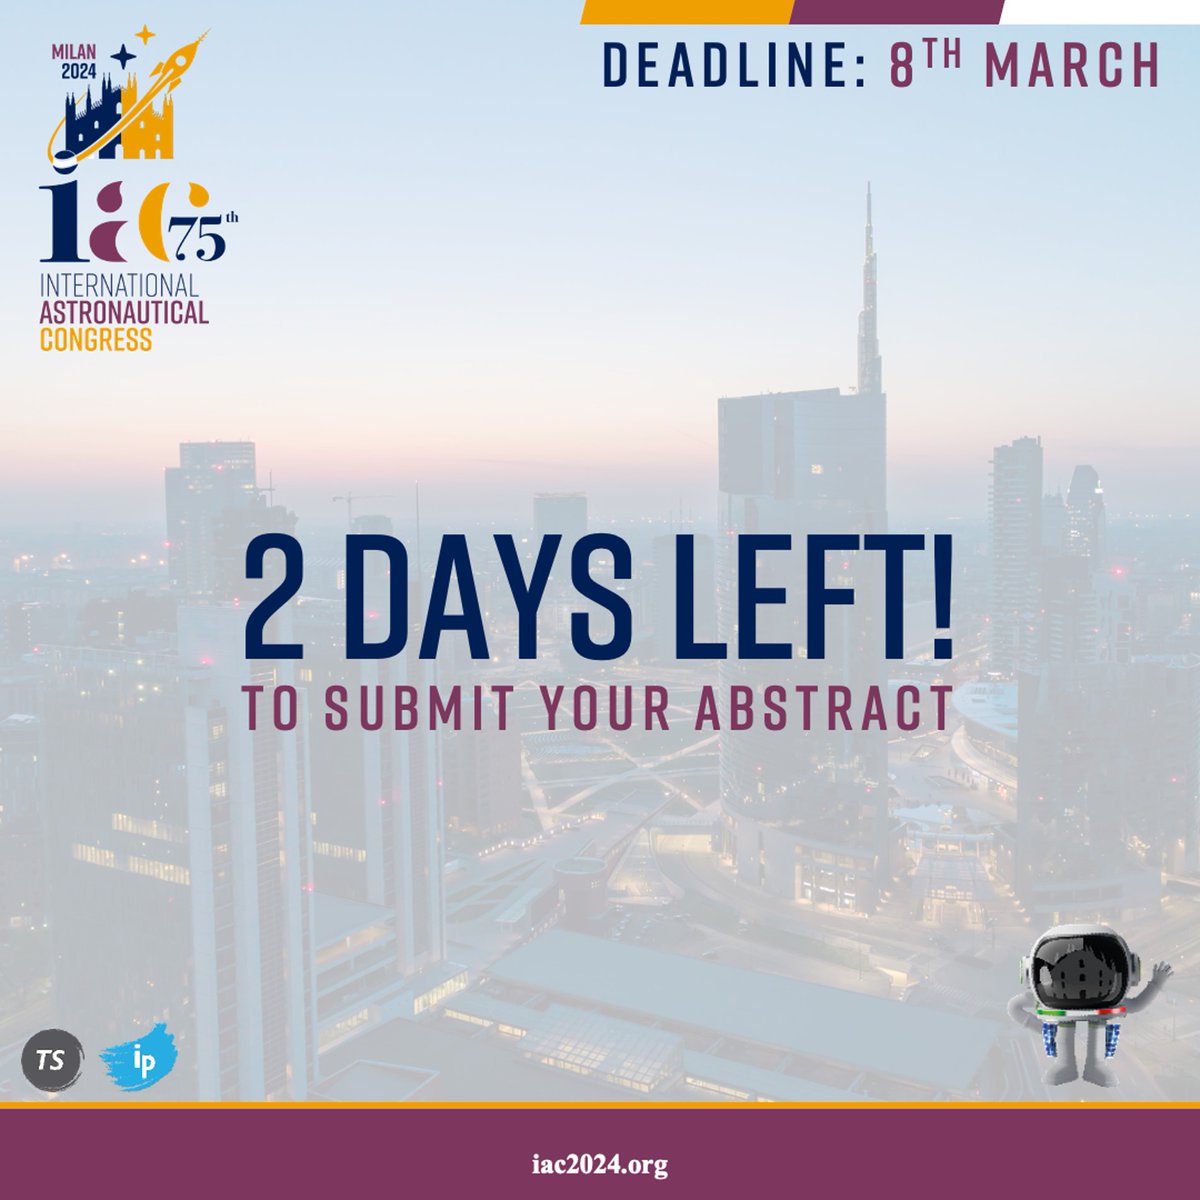 ONLY TWO DAYS LEFT! Now submit by Friday 8th March! 👉 Submit your abstract via the IAF portal at iafastro.directory/iac/account/lo… by 8th March 2024. #IAC2024 #SpaceCongress #CallForAbstract #SpaceSustainability @iafastro @aidaaitaly @ASI_spazio @Leonardo_live @telespazio